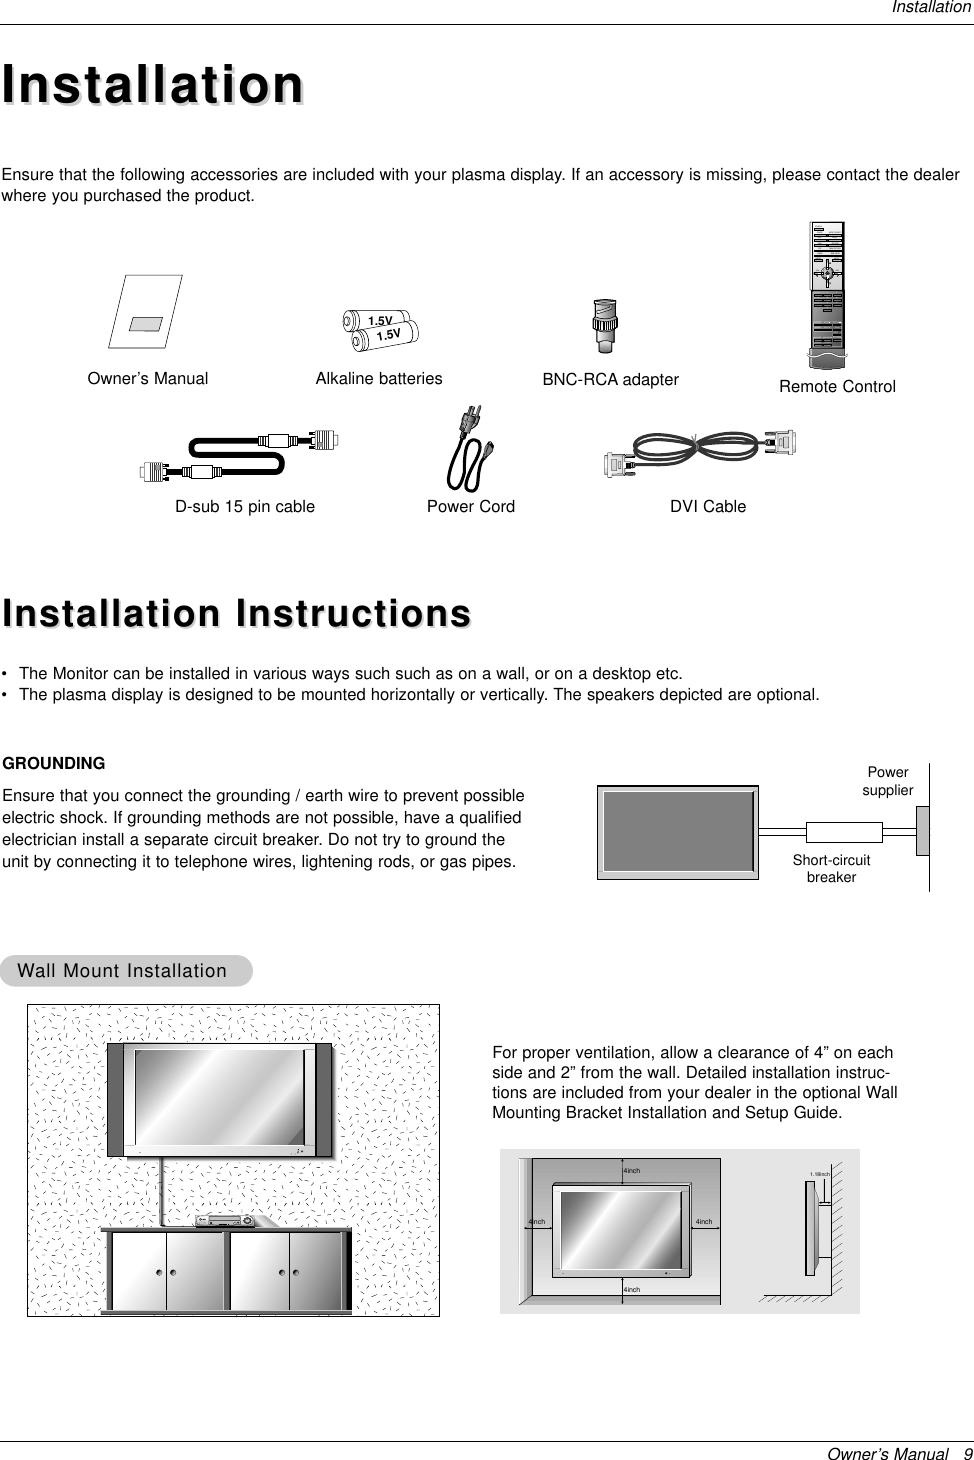 Owner’s Manual   9InstallationInstallationInstallationD-sub 15 pin cableOwner’s Manual1.5V1.5VAlkaline batteries BNC-RCA adapterPower Cord1234567809POWERSLEEP INPUT SELECTAPC DASPARC PIP ARCPIPTWIN PICTURESWAPMENU MUTEOKVOLPOWER STOPPLAY FFRECREWP/STILLWIN.SIZEWIN.POSITIONZOOM +ZOOM -SPLIT ZOOMVOLSUB INPUTRemote ControlDVI CableEnsure that the following accessories are included with your plasma display. If an accessory is missing, please contact the dealerwhere you purchased the product.Installation InstructionsInstallation Instructions•The Monitor can be installed in various ways such such as on a wall, or on a desktop etc.•The plasma display is designed to be mounted horizontally or vertically. The speakers depicted are optional.GROUNDINGEnsure that you connect the grounding / earth wire to prevent possibleelectric shock. If grounding methods are not possible, have a qualifiedelectrician install a separate circuit breaker. Do not try to ground theunit by connecting it to telephone wires, lightening rods, or gas pipes.PowersupplierShort-circuitbreaker4inch4inch4inch4inch1.18inchWWall Mount Installationall Mount InstallationFor proper ventilation, allow a clearance of 4” on eachside and 2” from the wall. Detailed installation instruc-tions are included from your dealer in the optional WallMounting Bracket Installation and Setup Guide.